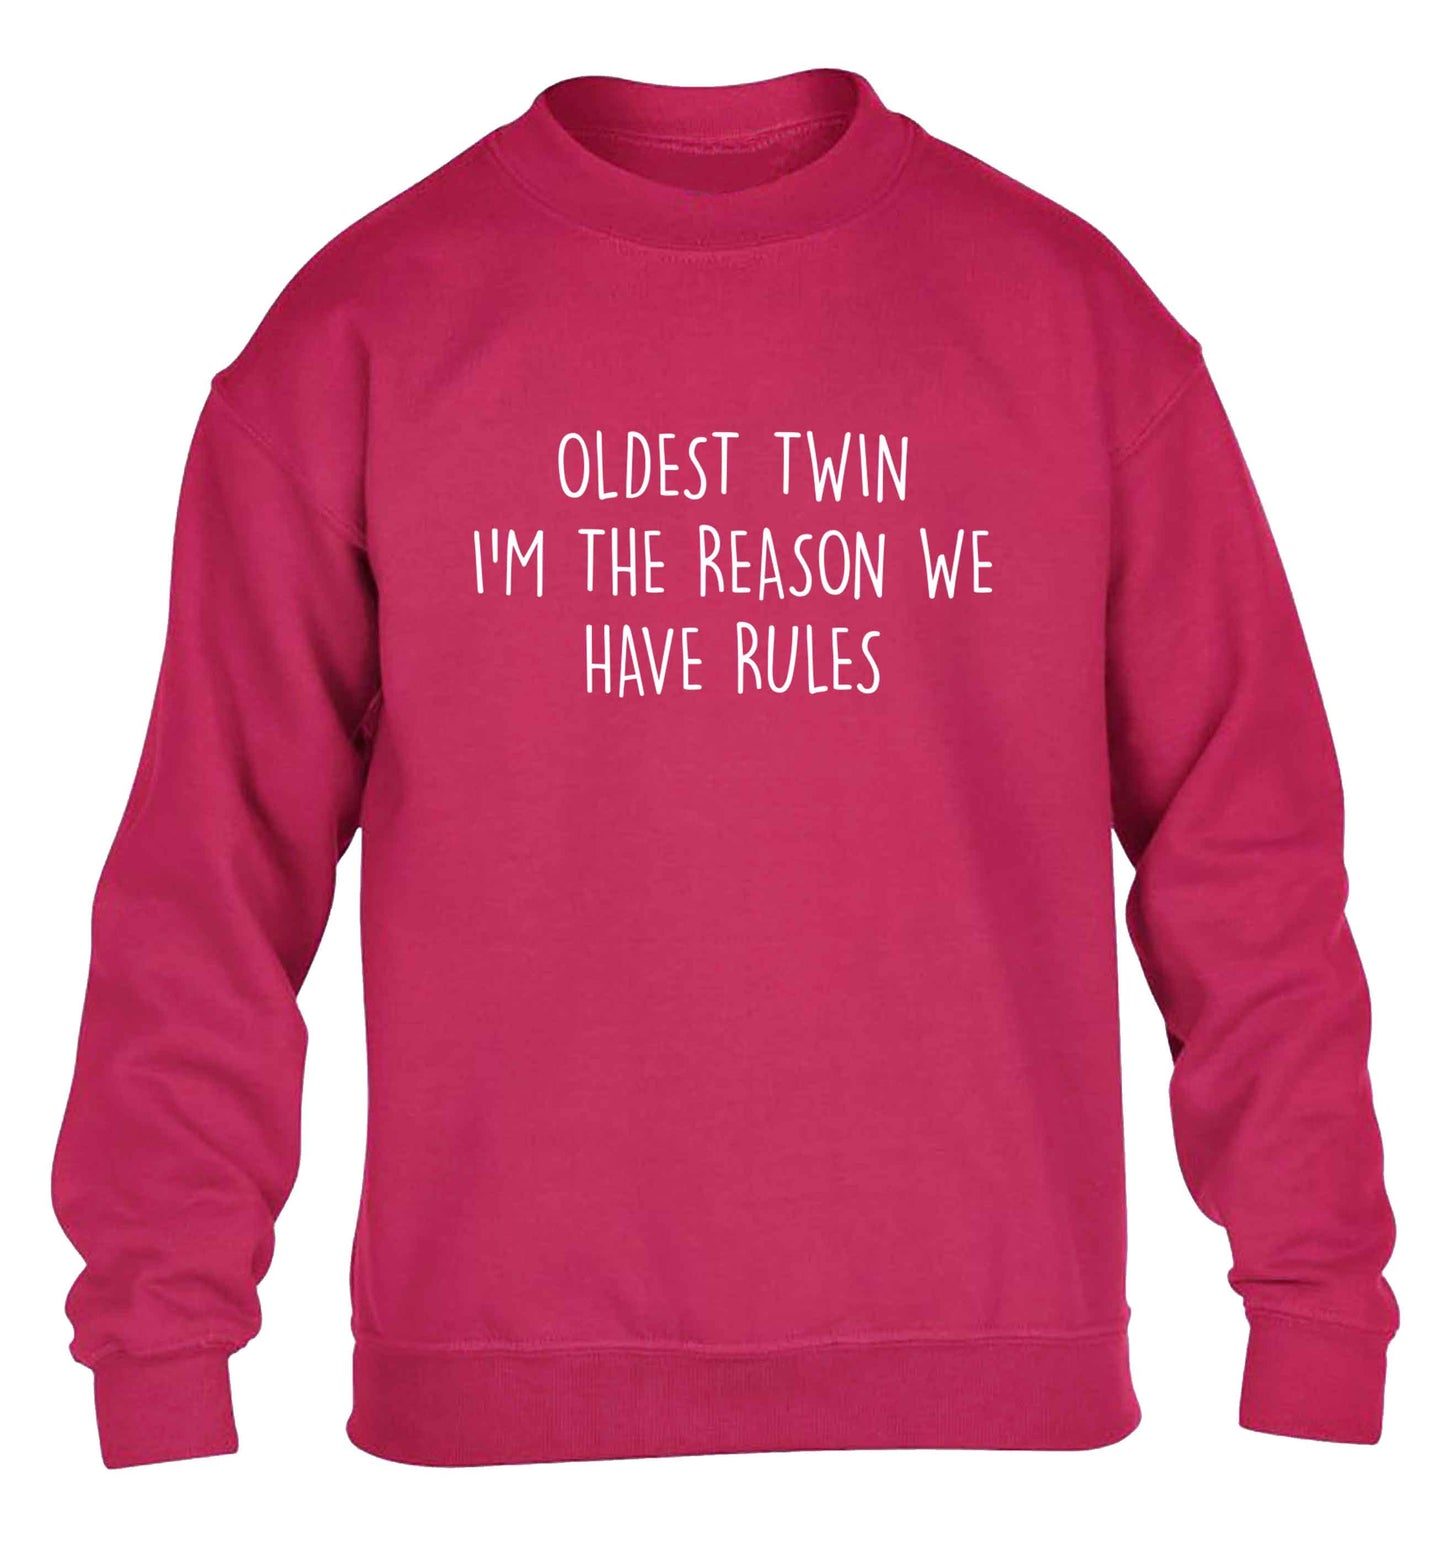 Oldest twin I'm the reason we have rules children's pink sweater 12-13 Years